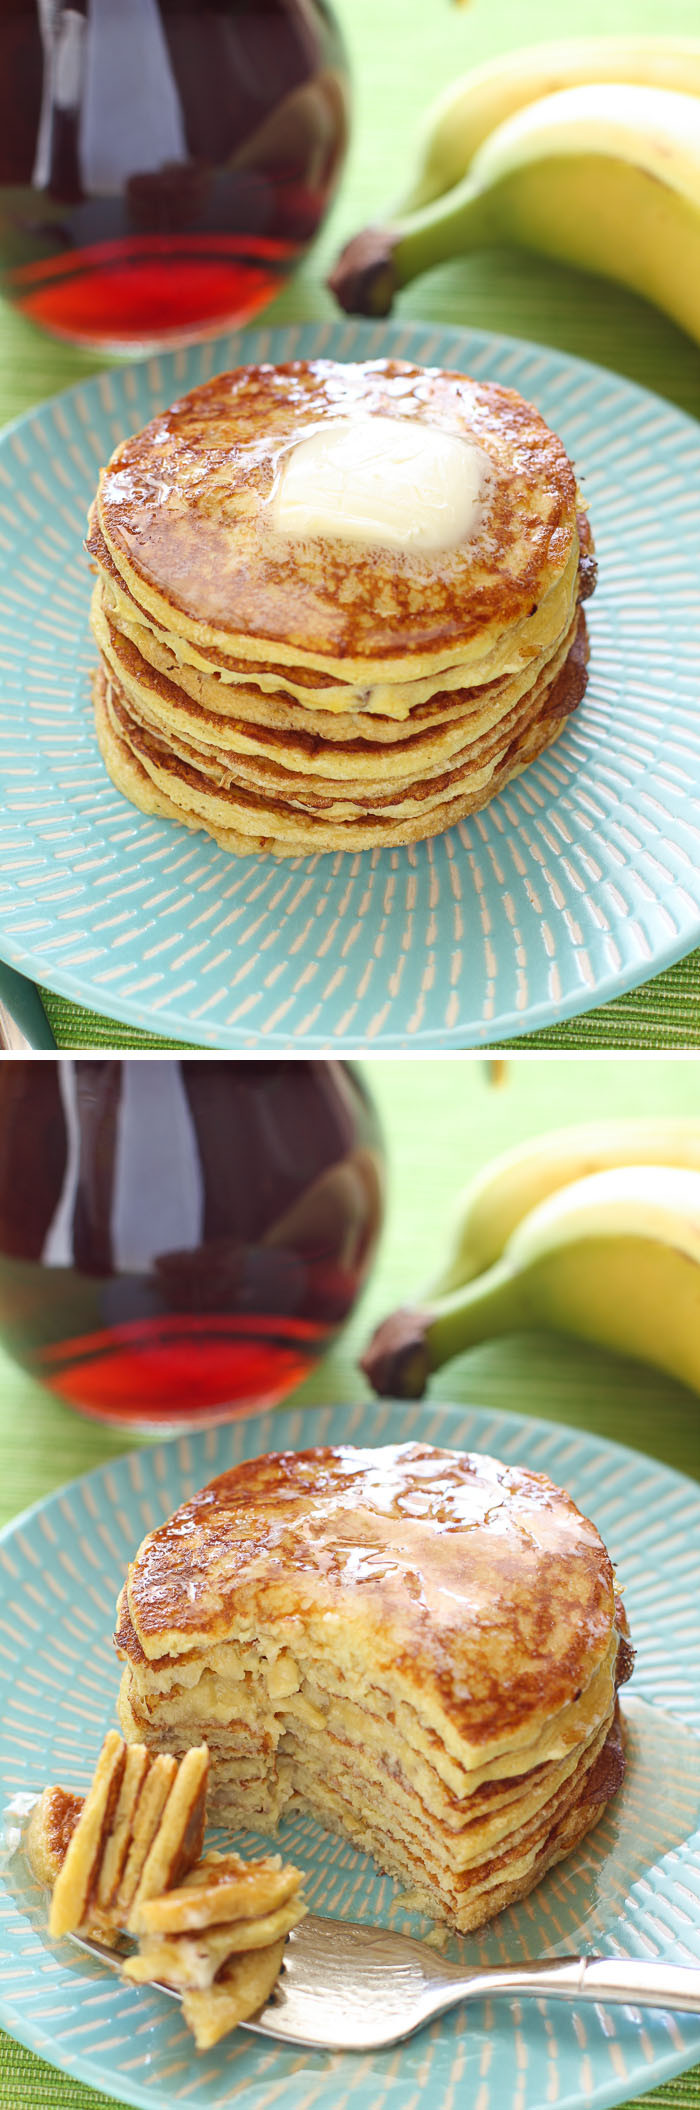 Healthy Protein Pancakes
 Four Ingre nt Protein Pancakes and 16 other simple